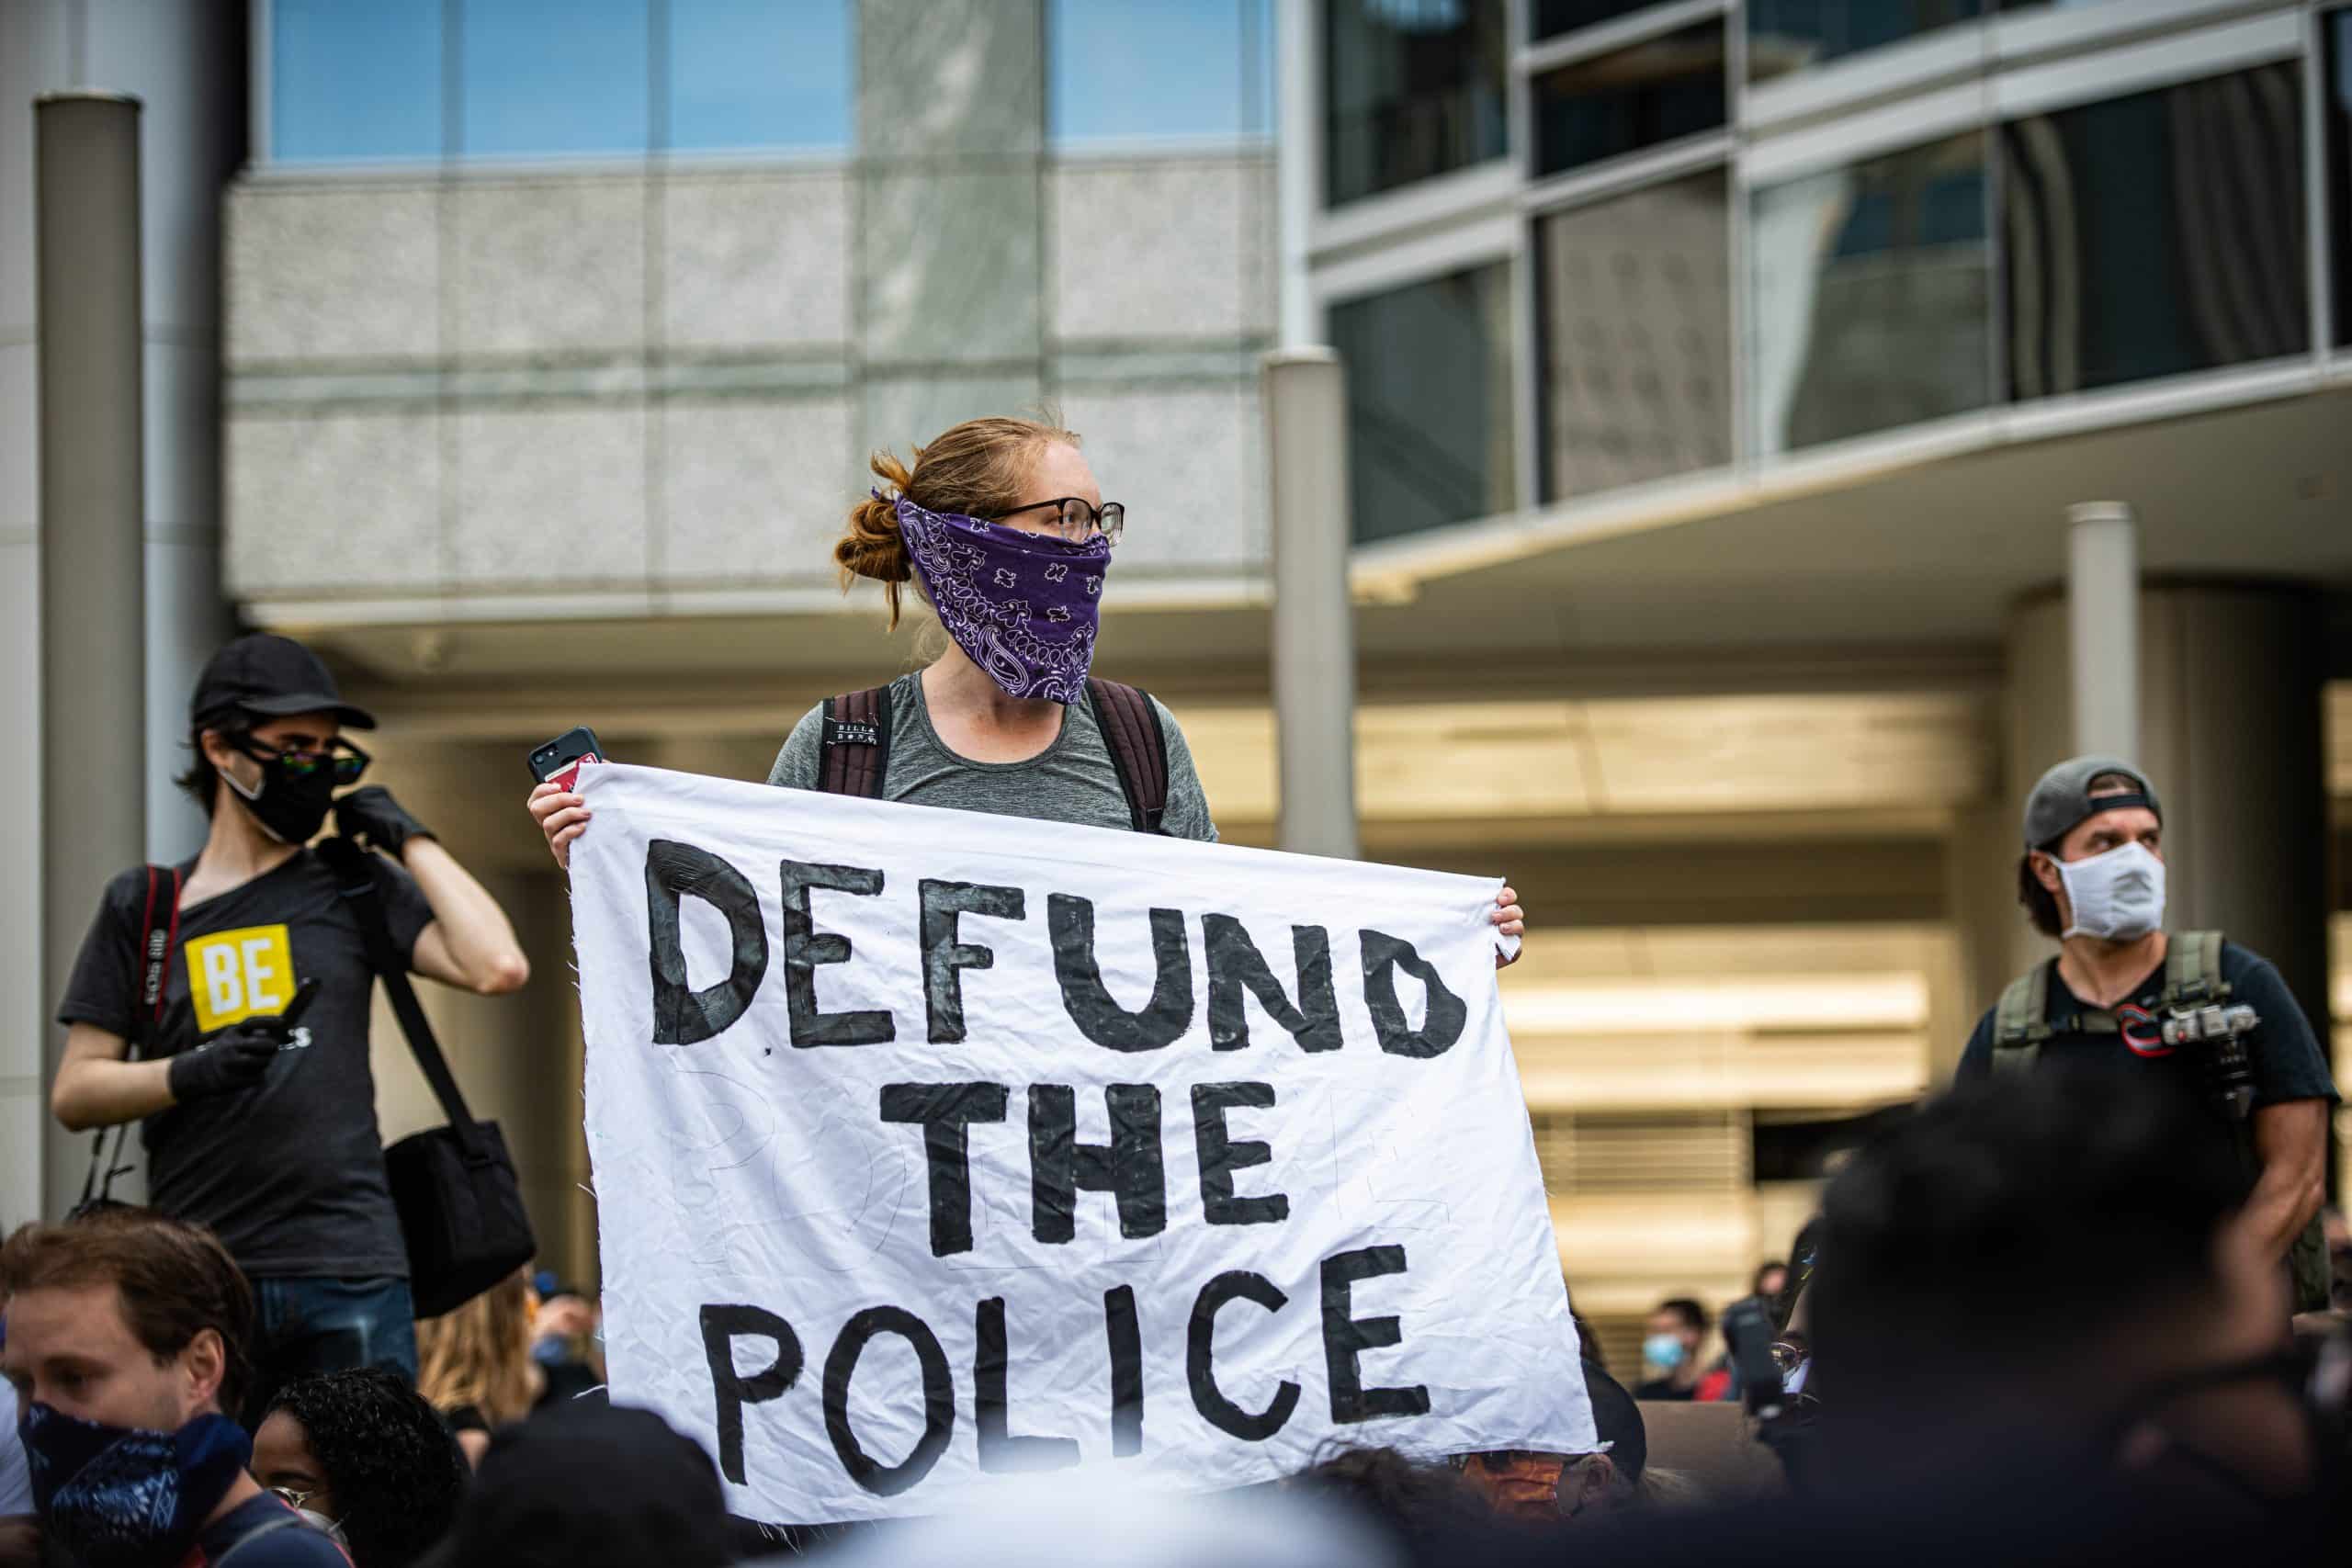 There Are Solutions Besides ‘Defund the Police’